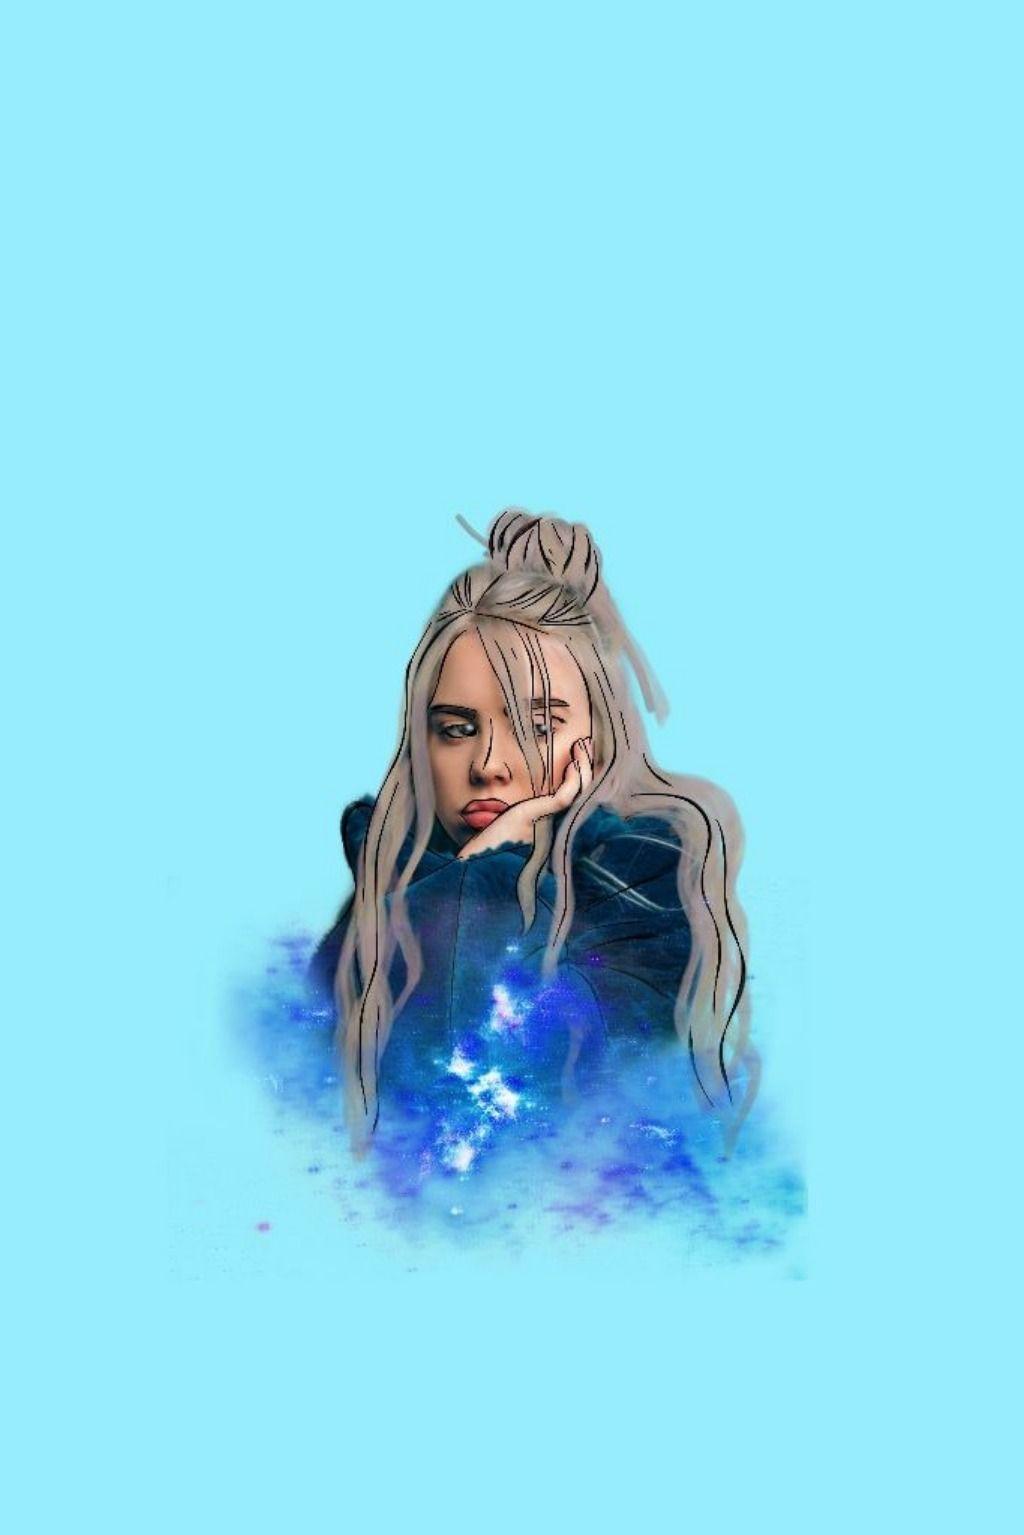 Ways To Use Stickers To Flood Your Socials With Billie Eilish Fan Art + Discover with PicsArt. Billie eilish, Billie, Girl cartoon